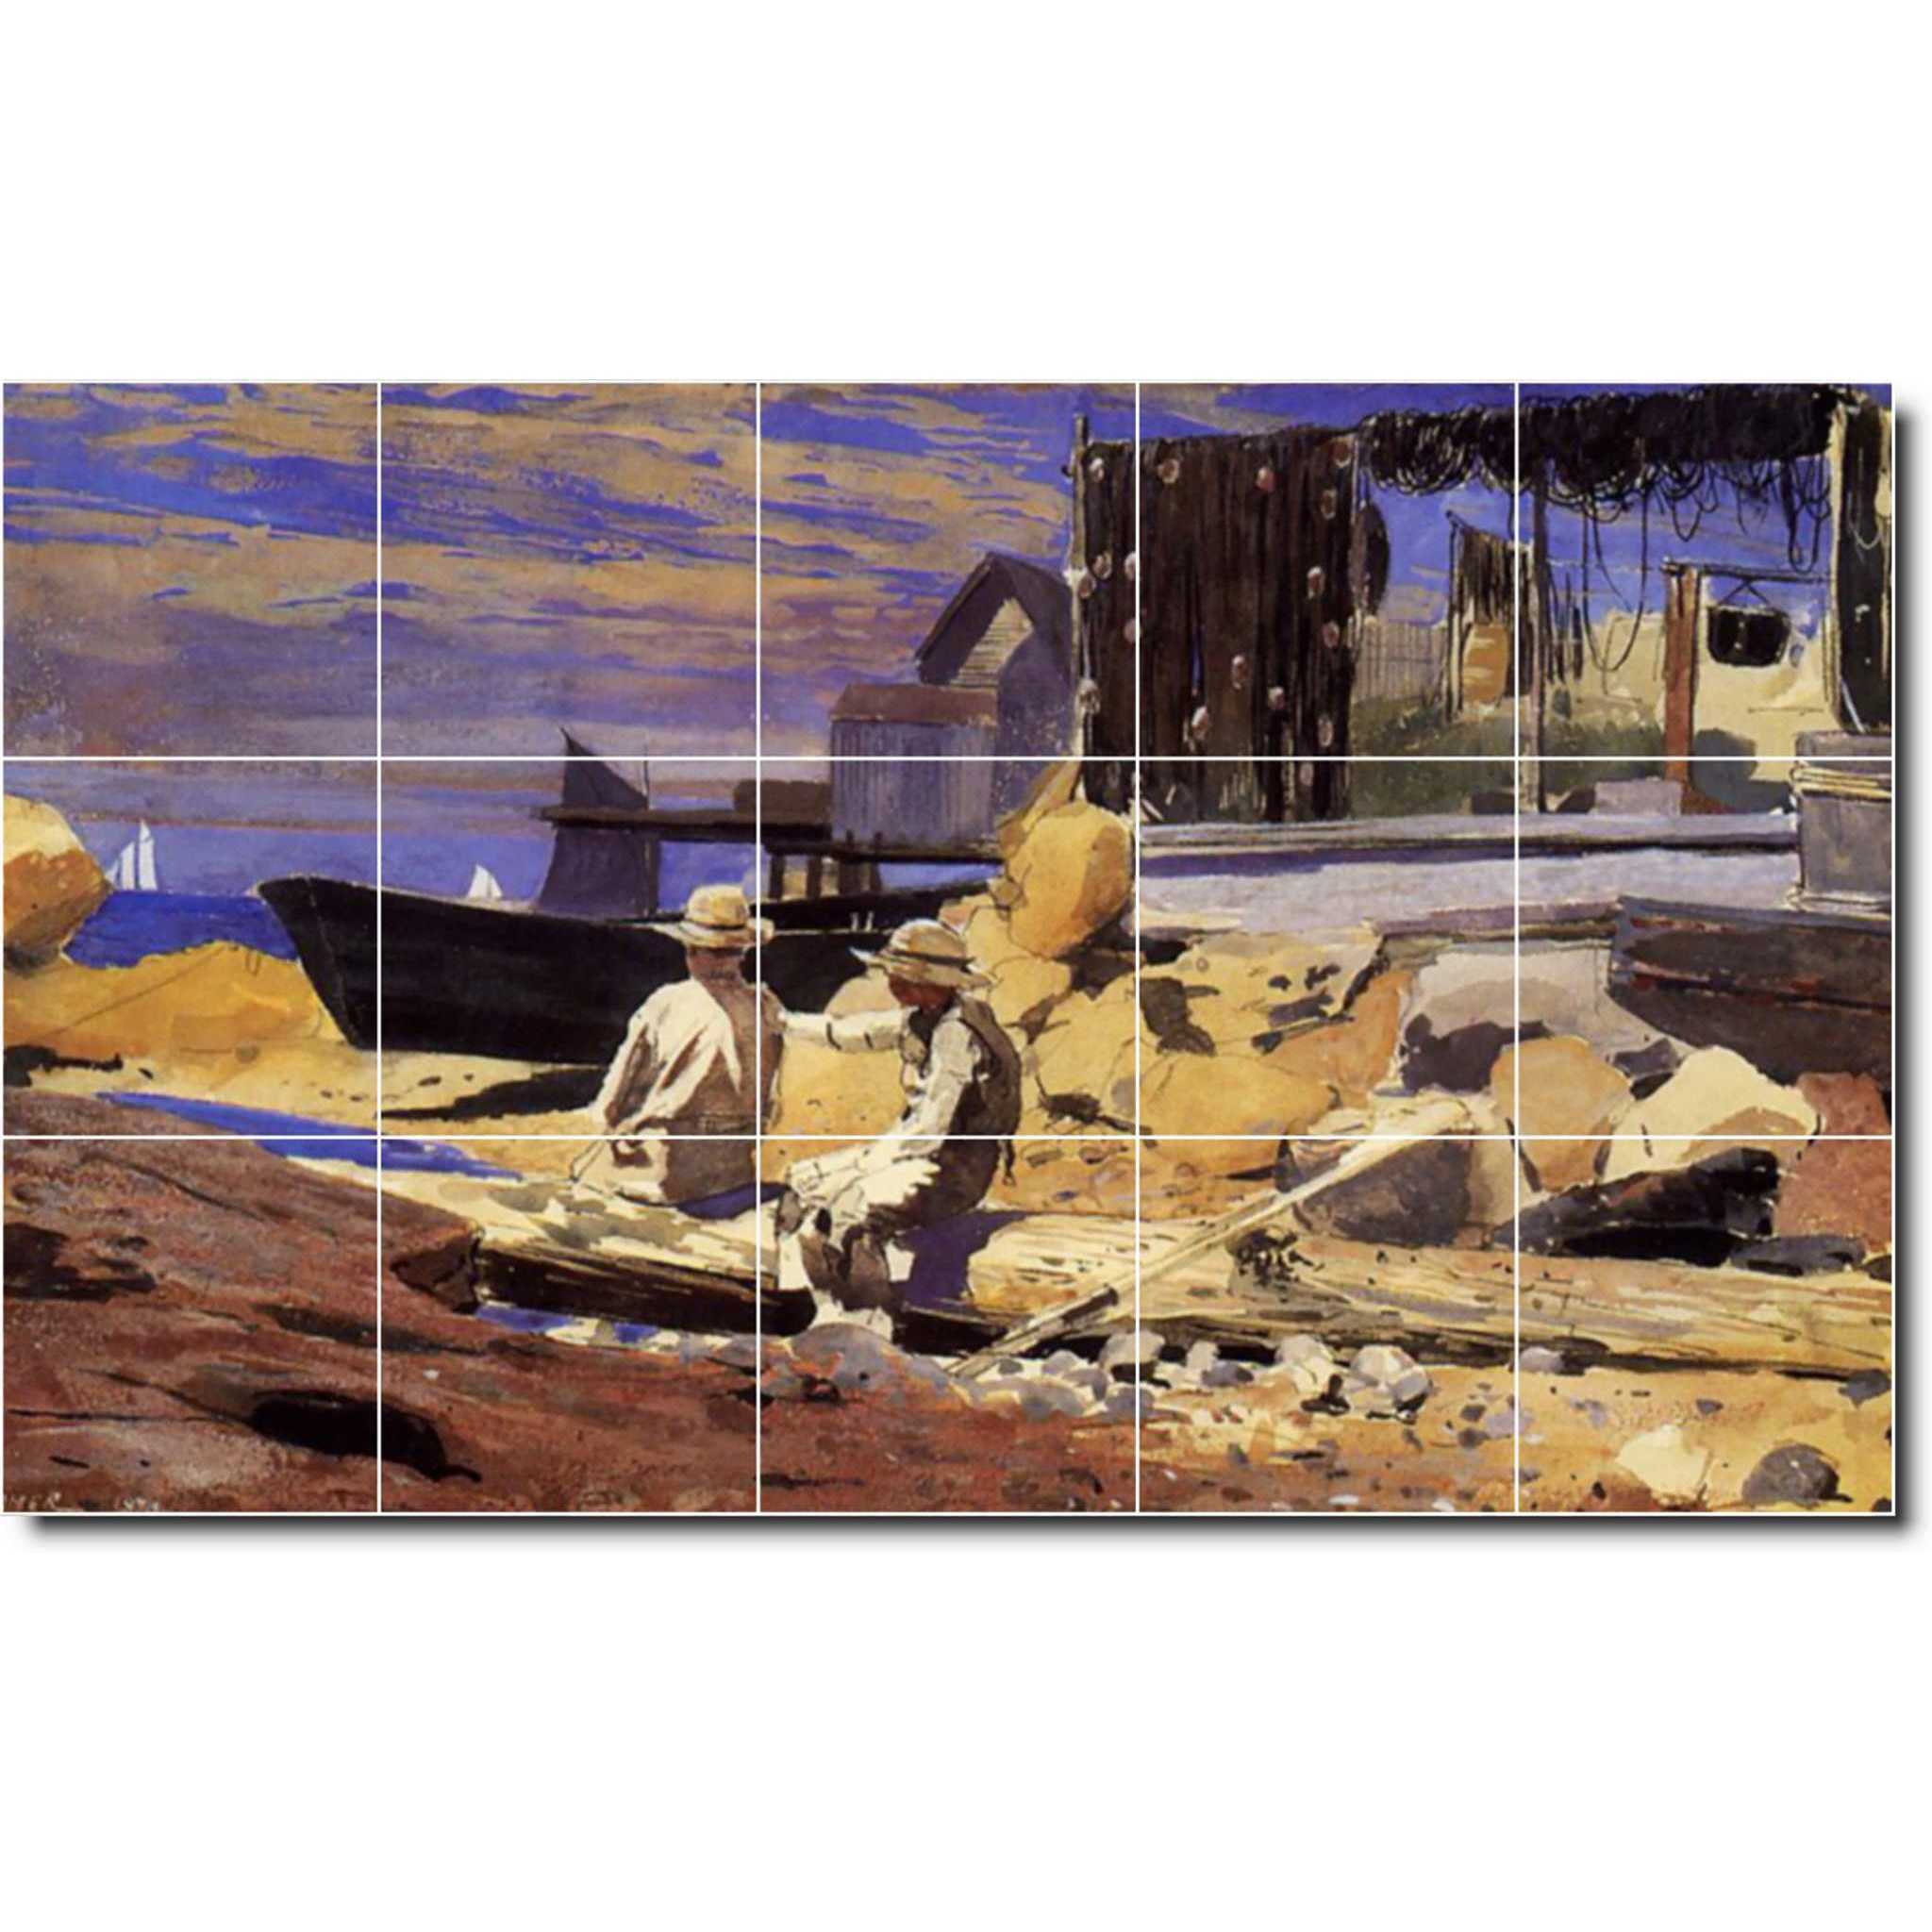 Winslow Homer Waterfront Painting Ceramic Tile Mural P04527-XL. 60"W x 36"H (15) 12x12 tiles